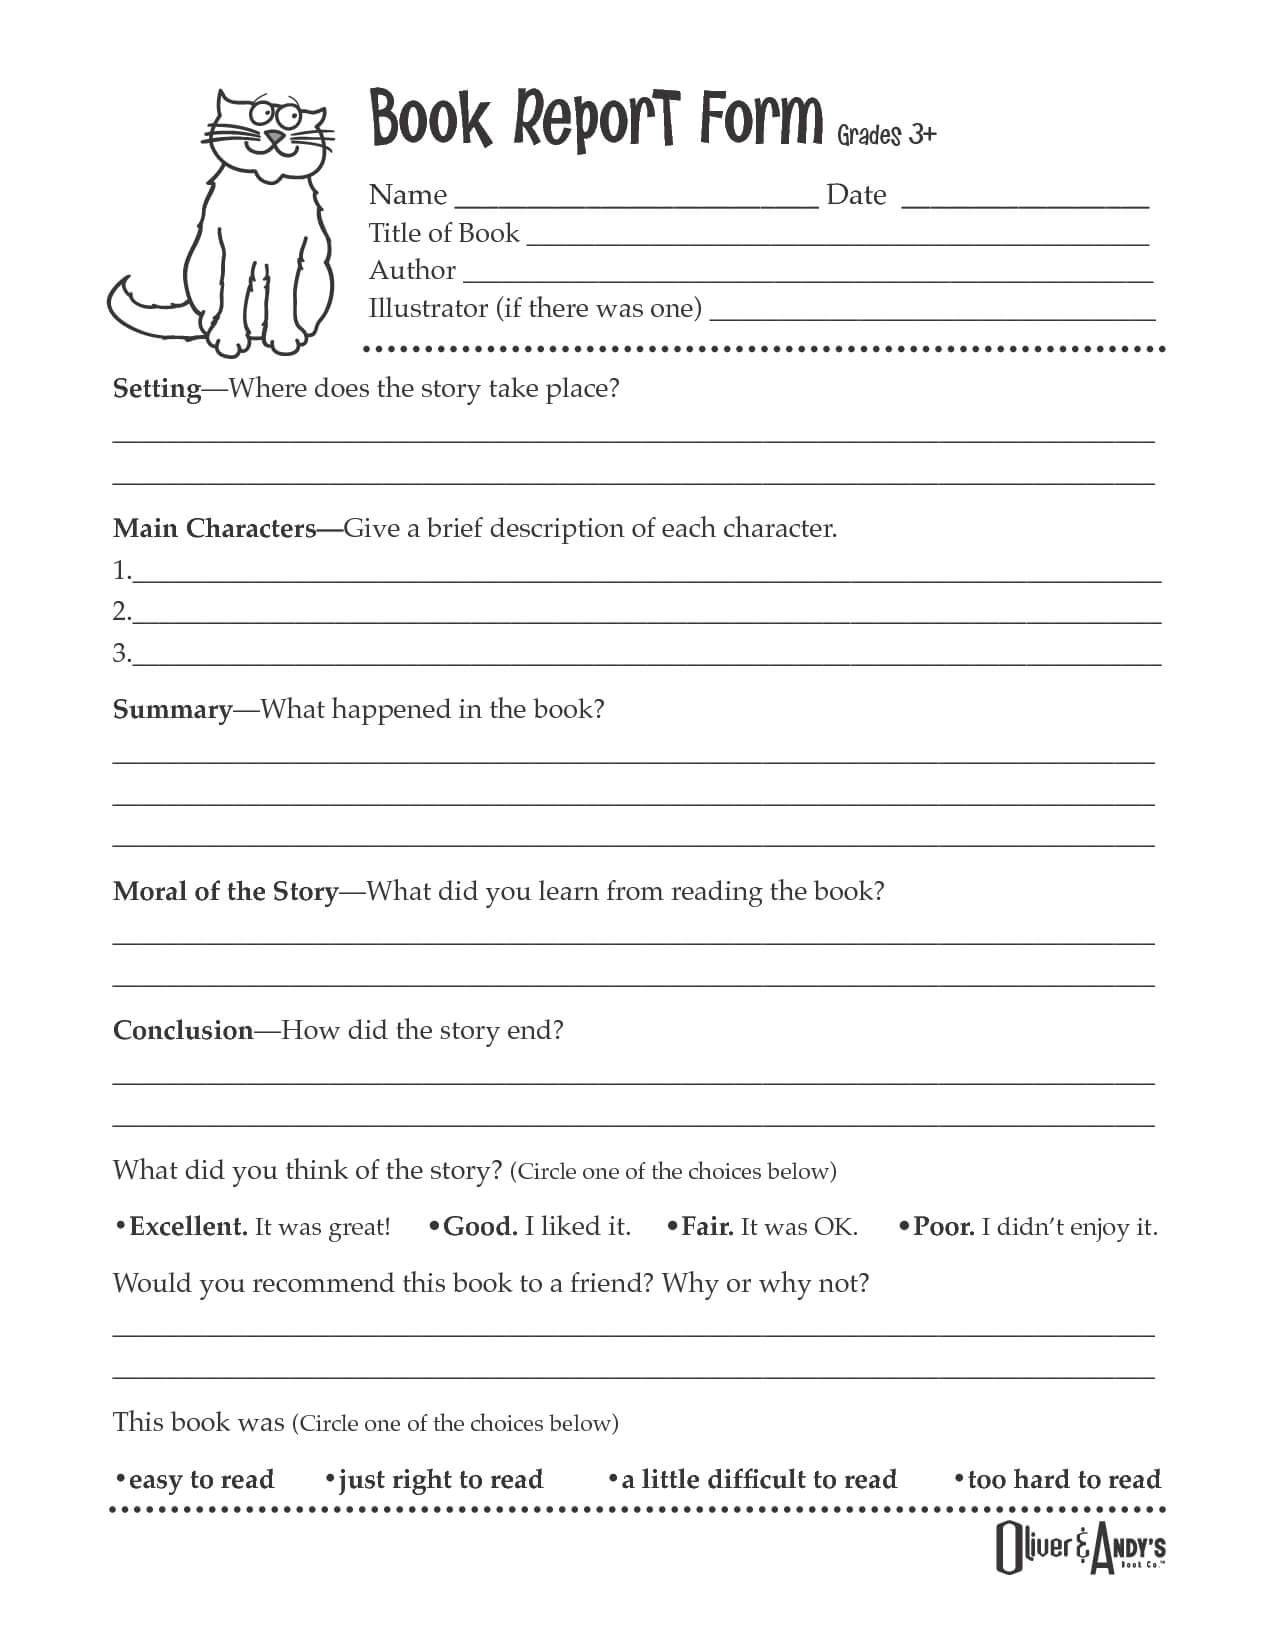 Second Grade Book Report Template | Book Report Form Grades Intended For Story Report Template